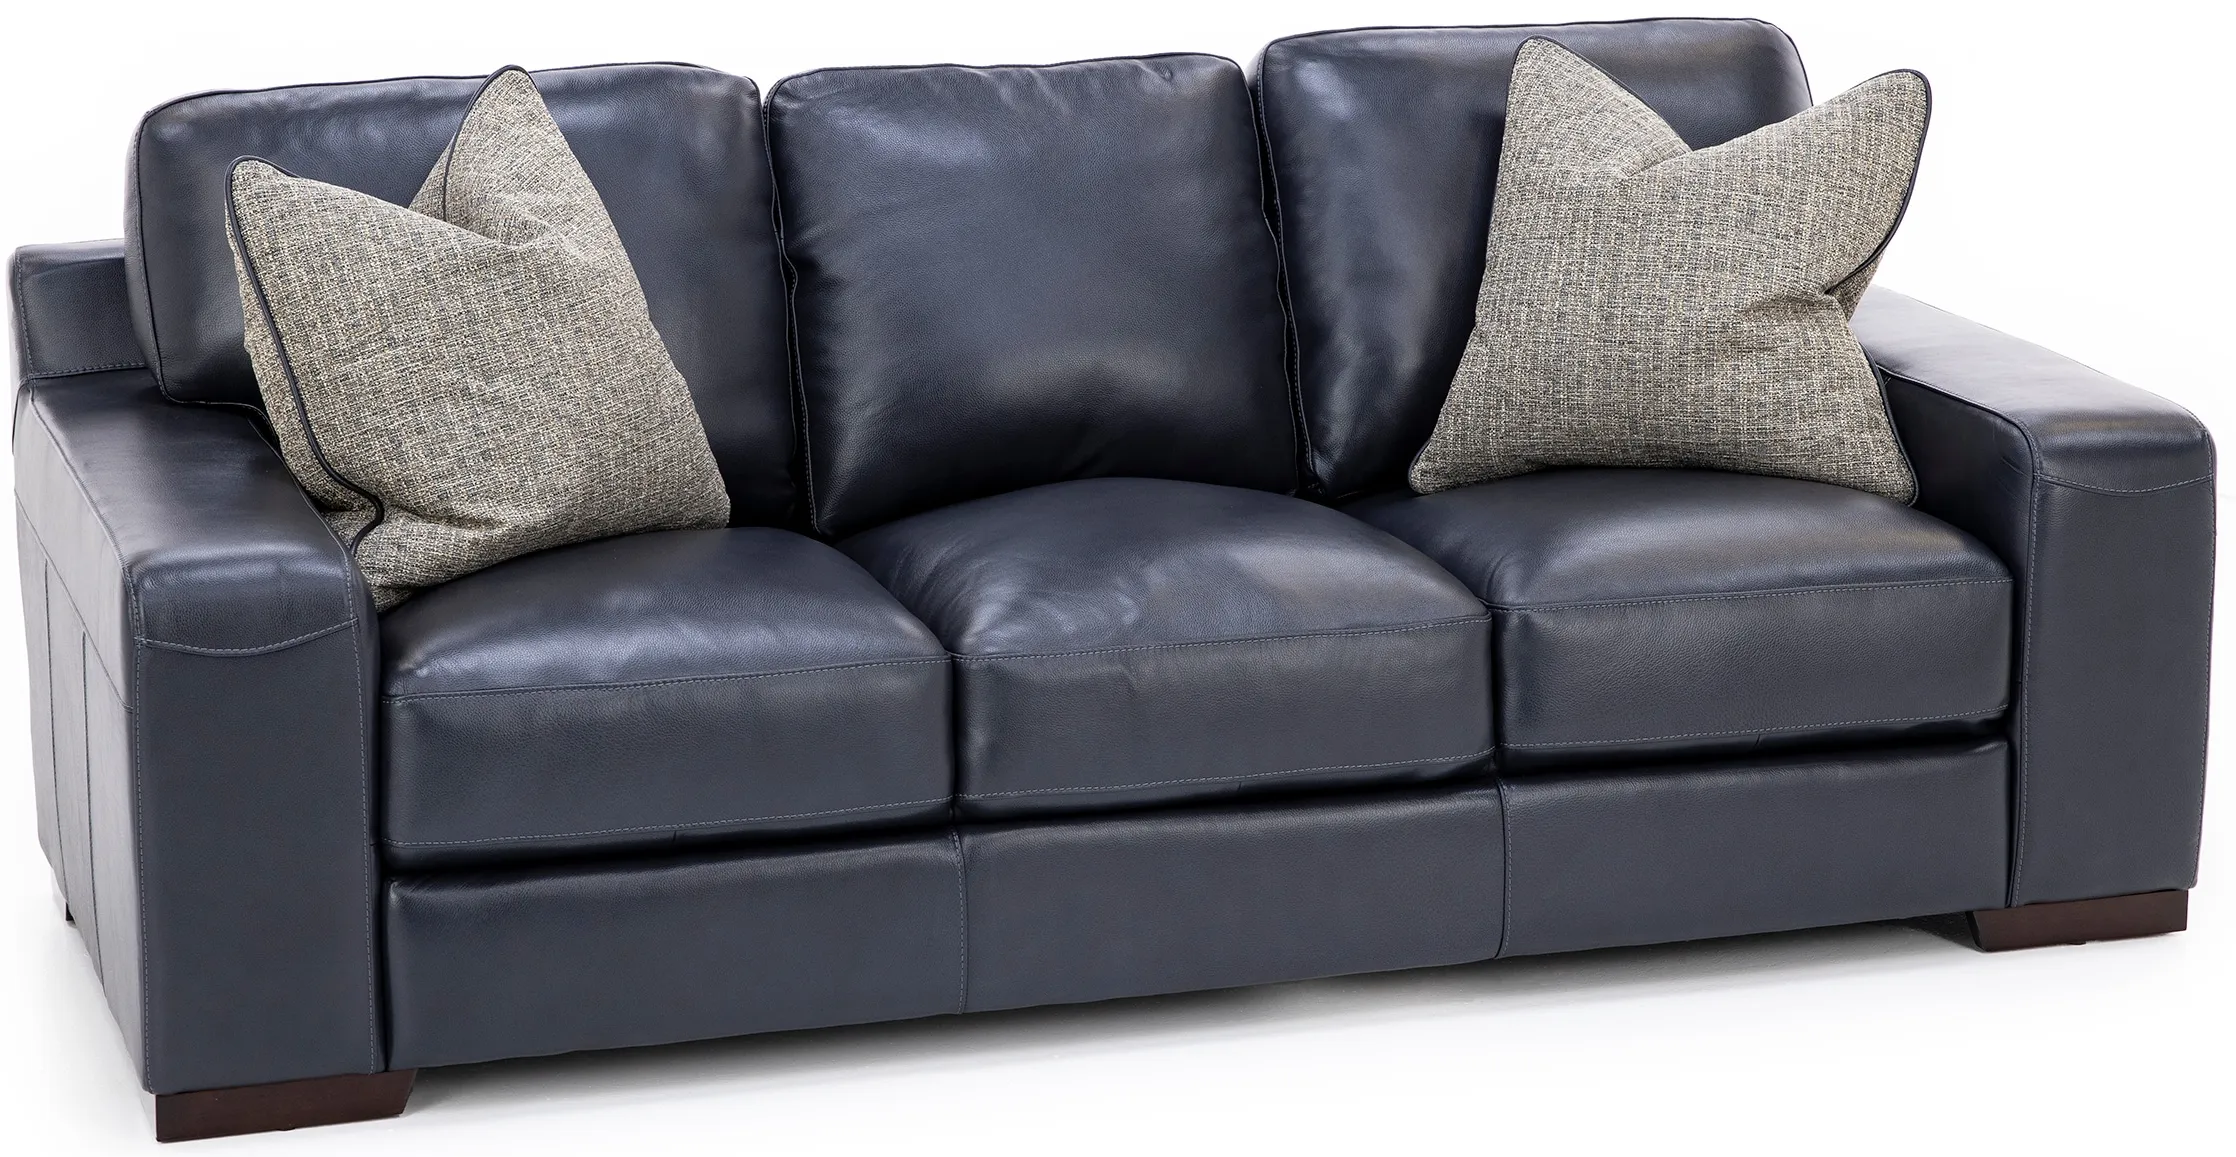 Everest Leather Sofa With Wireless Charging in Deep Blue